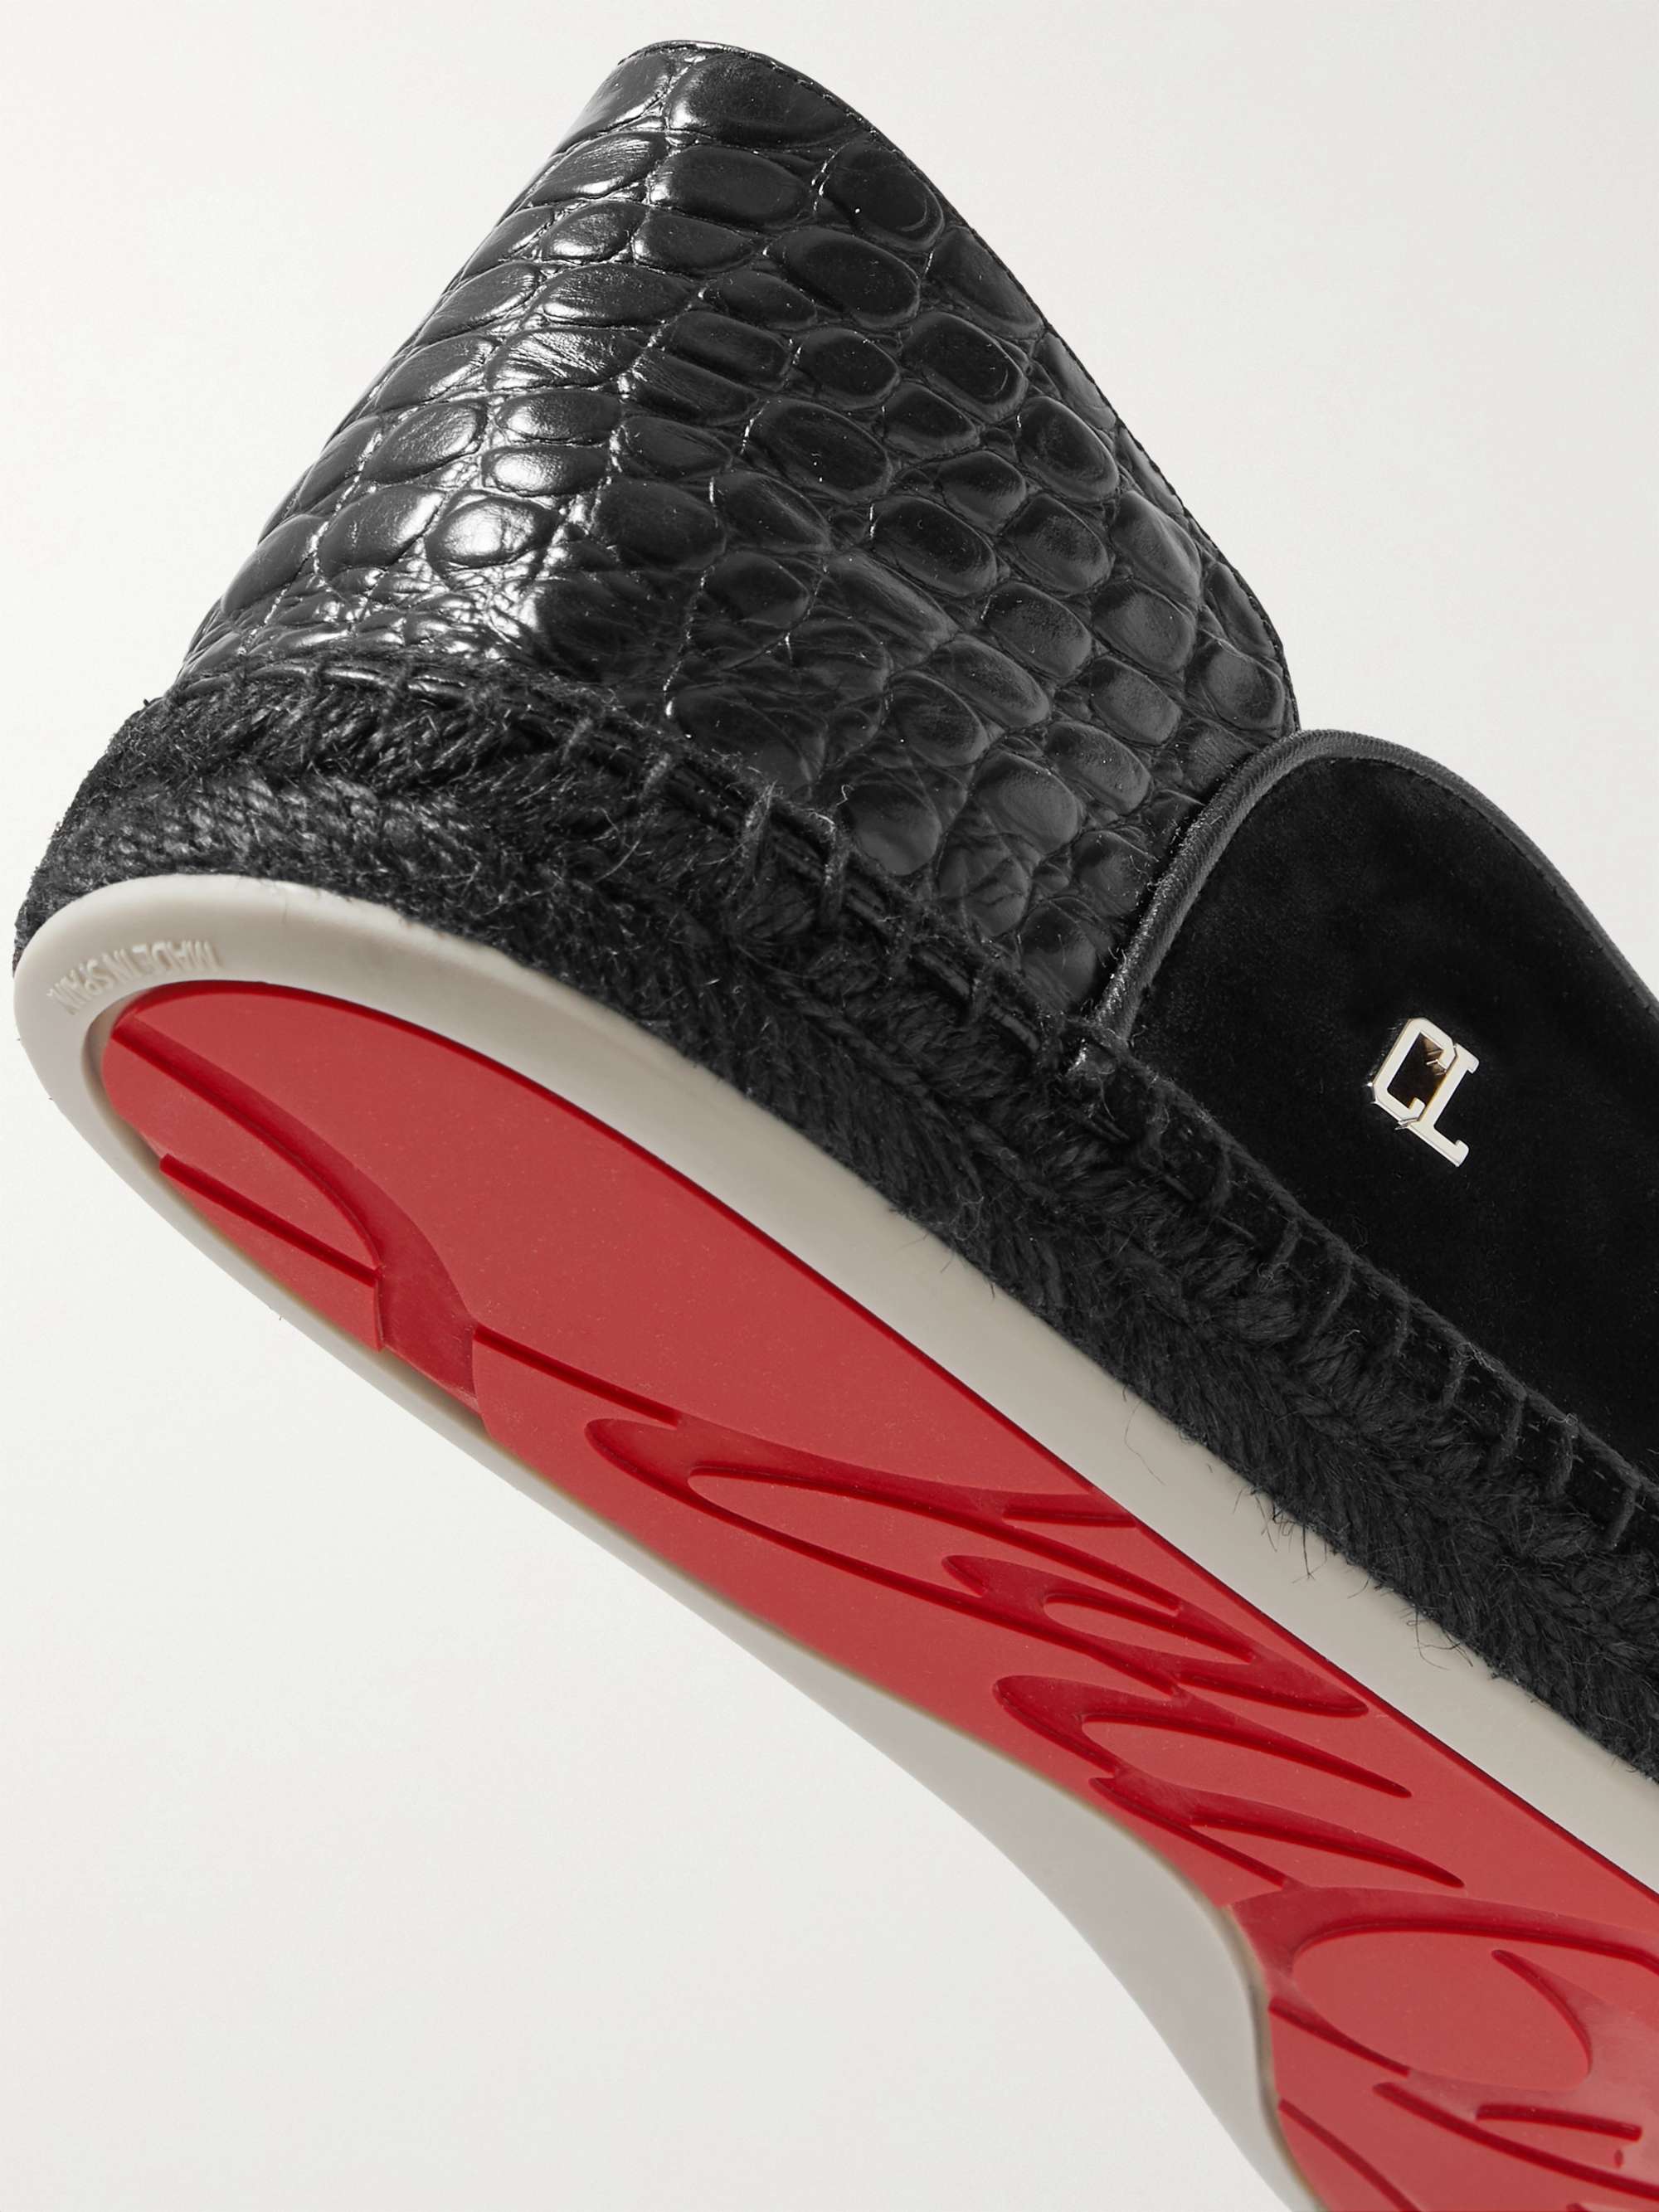 CHRISTIAN LOUBOUTIN Collapsible-Heel Croc-Effect Leather-Trimmed Suede Espadrilles